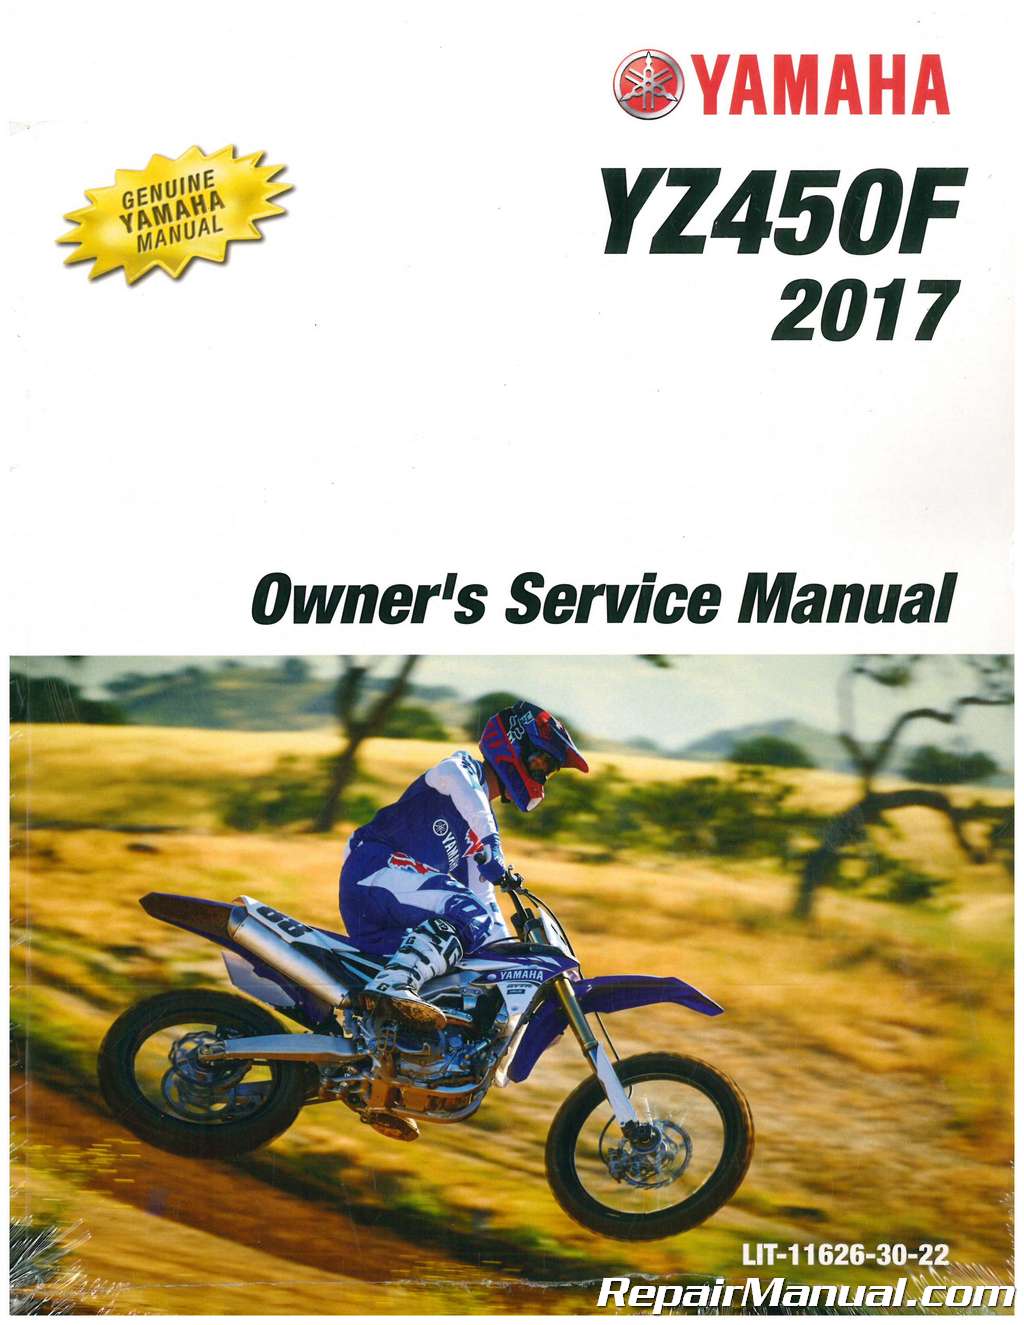 2017 Yamaha YZ450F Motorcycle Owners Service Manual